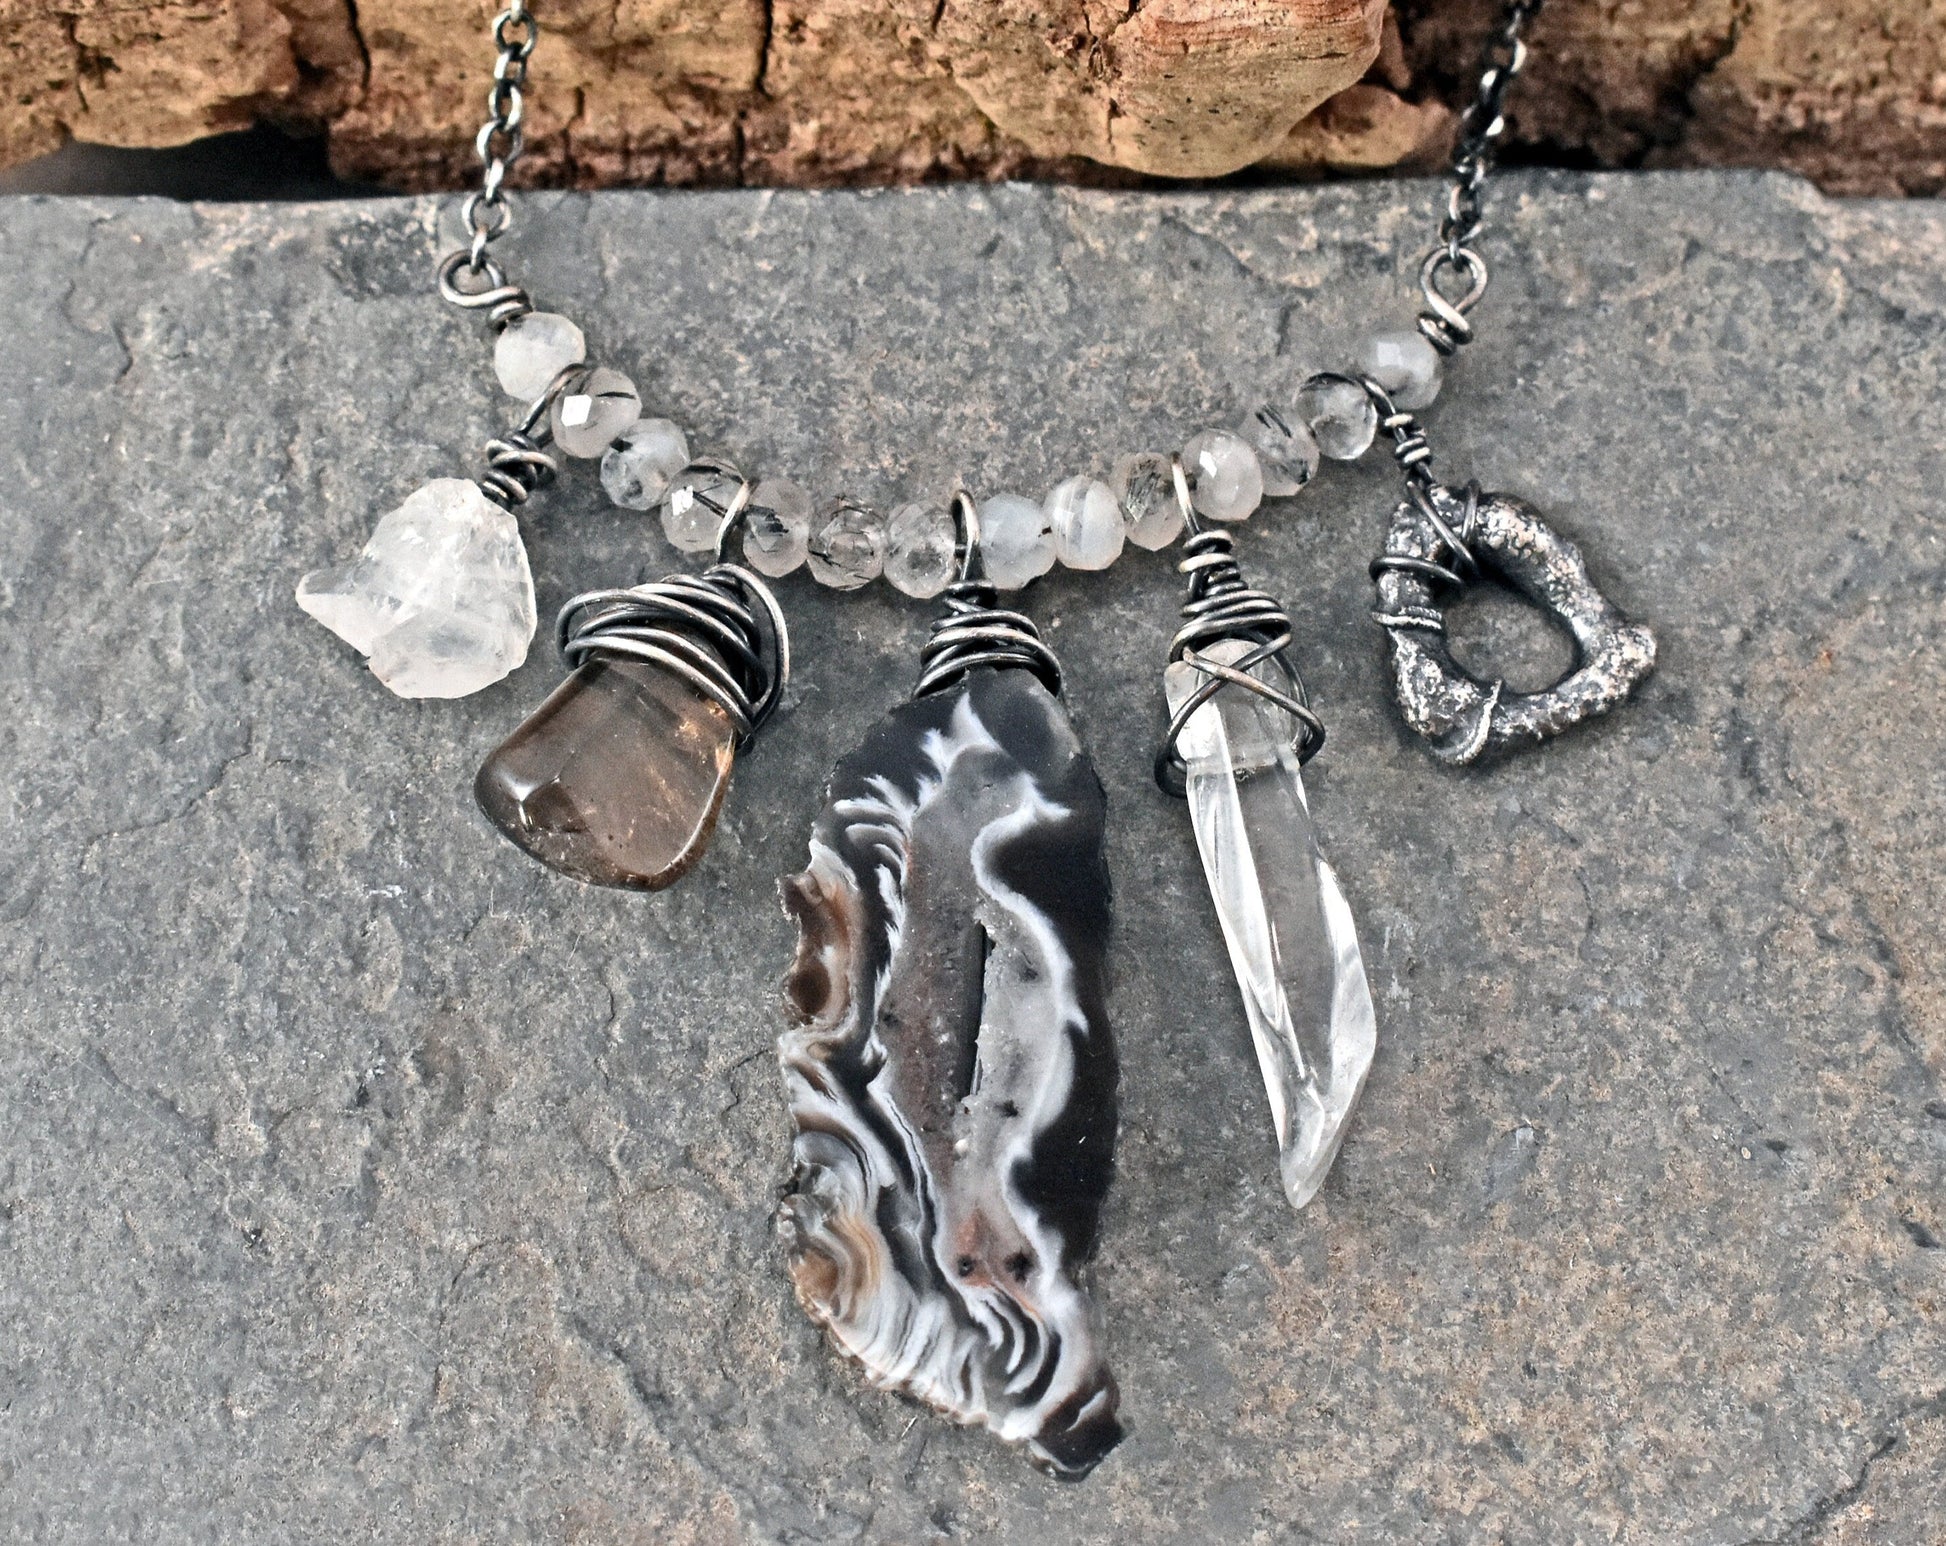 Oco Agate Sterling Silver Necklace, Quartz Crystal Point Pendant, Unique One of a Kind Rustic Mixed Gemstone Jewelry, Oxidized Wire Wrap